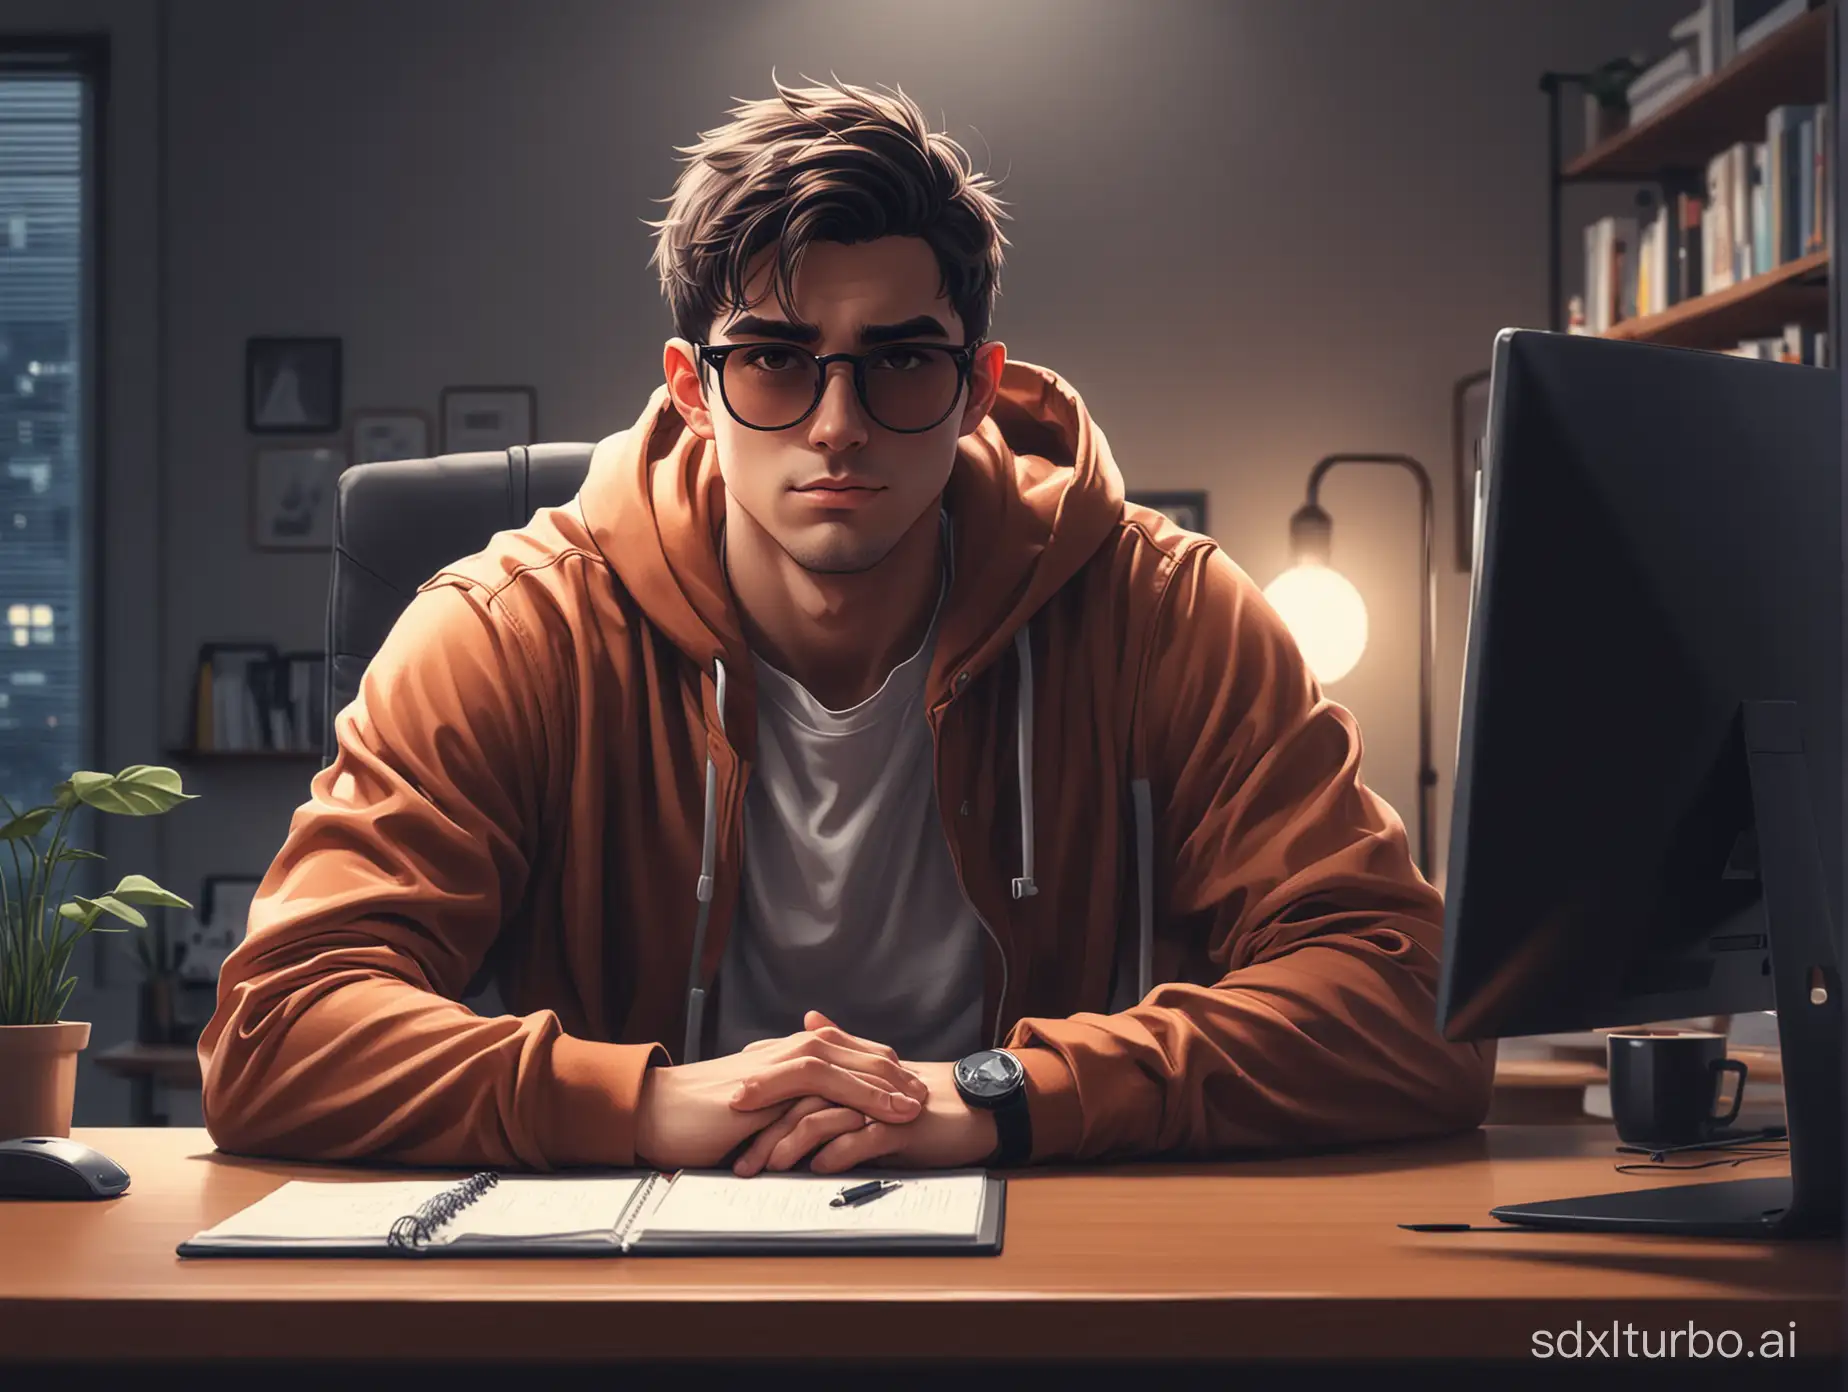    ANIME FRIENDLY LOOKING MALE BUSINESS CHARACTER , HOODIE AND SUNGLASSES.HE IS FRONT FACING TO THE CAMERA, HE IS SITTING BEHIND HIS LAPTOP IN HIS OFFICE, ARMS ON HIS DESK. IT IS NIGHT. THE ROOM HAS VOLUMETRICLIGHTING. LOOKING STRAICHT AND CENTERED, CENTRAL PORTRAIT, SITTING STRAIGHT, FRONT VIEW, CENTERED LOOKING STRAIGHT. THE OVERALL AMBIANCE OF THE IMAGE SHOULD CONVEY A CONNECTION TO MINIMALISM, FLAT ILLUSTRATION, BOLD LINE, MINIMALISM, SIMPLIFIED, GOUACHE ILLUSTRATION. 8K RESOLUTION